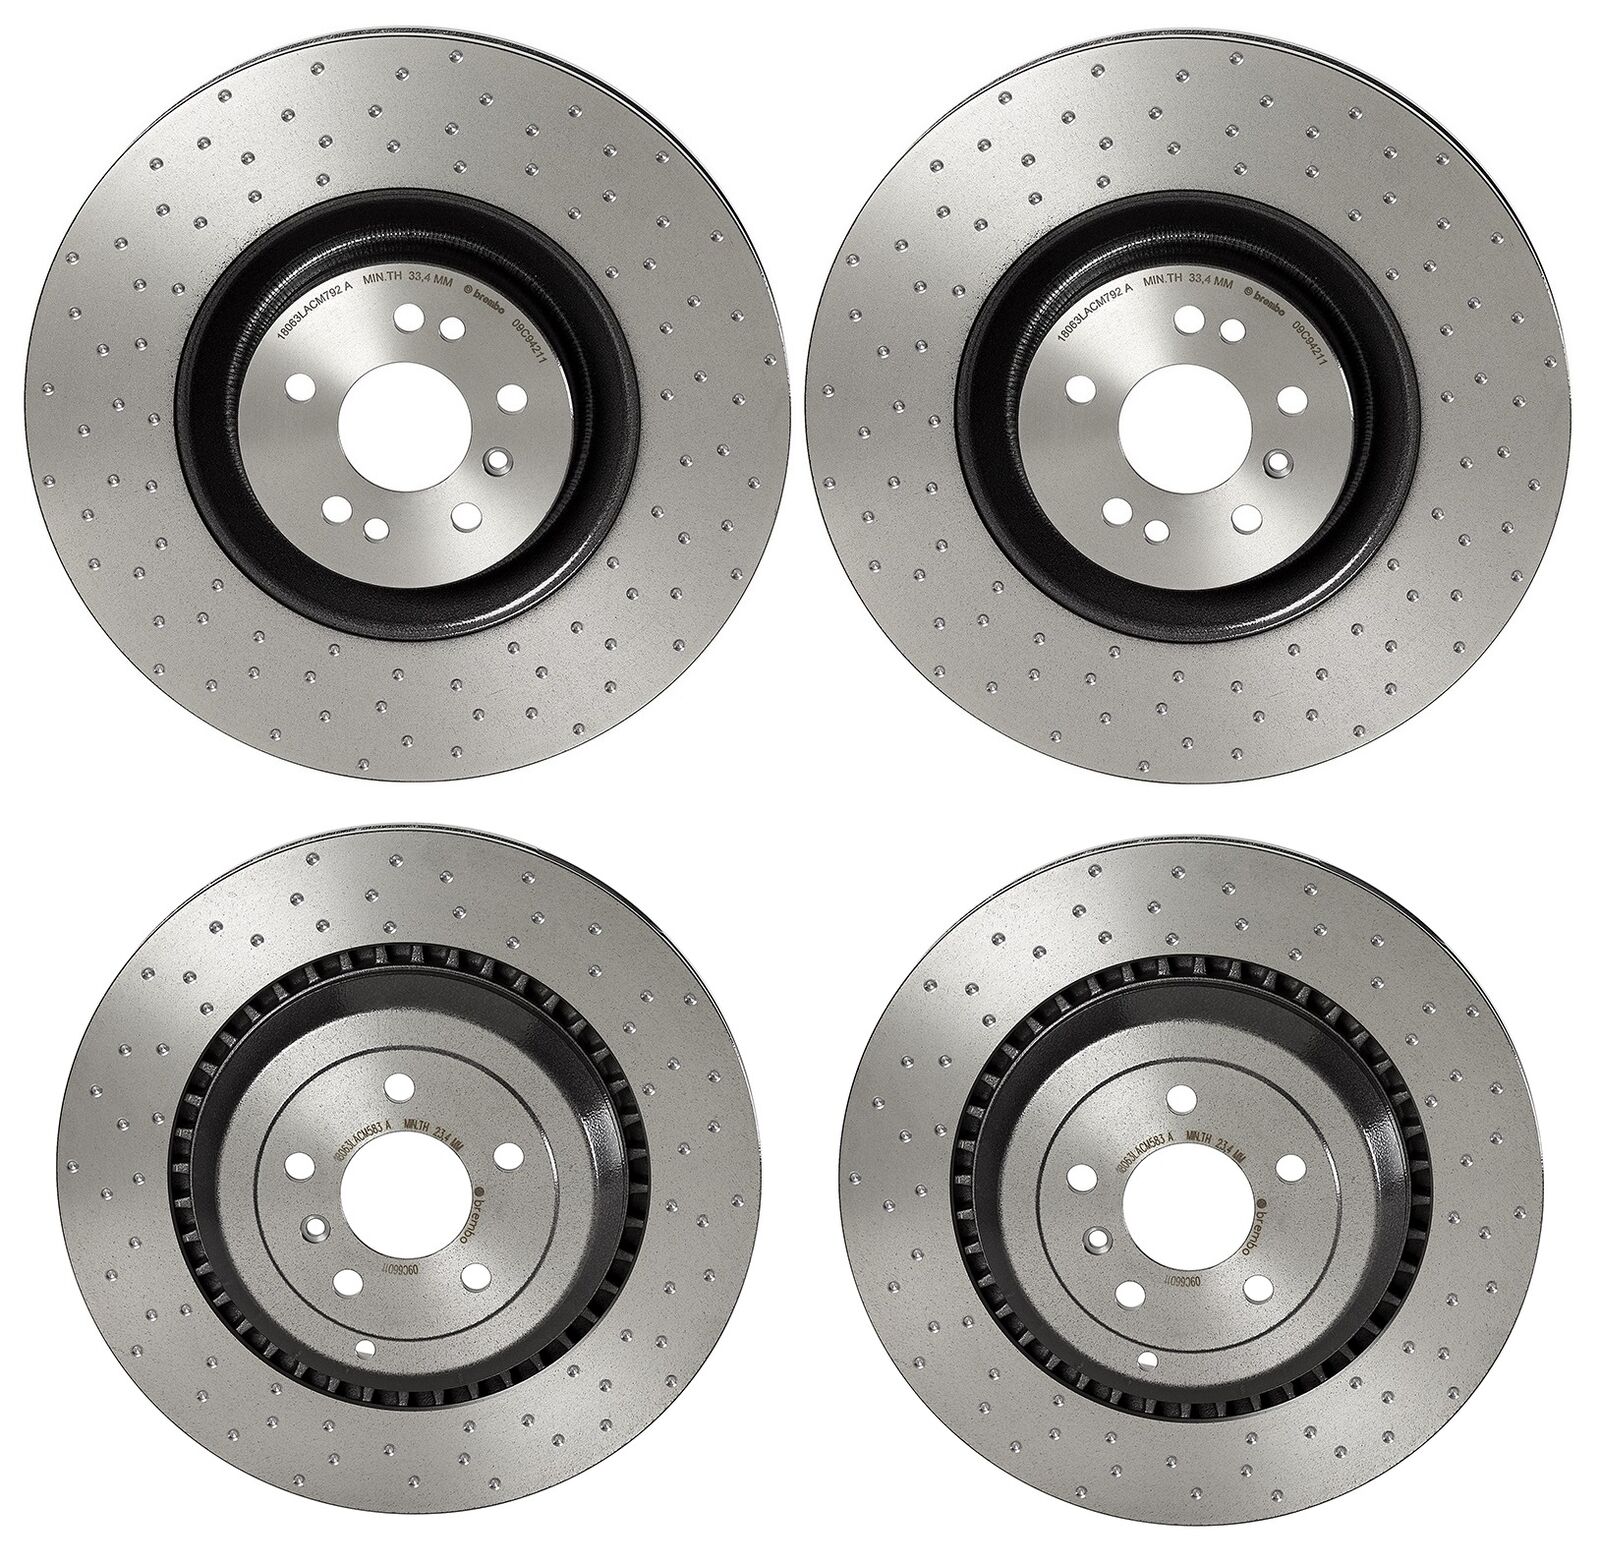 Brembo Front and Rear Brake Disc Rotors Drilled Coated Kit for MB W164 W251 6.3L